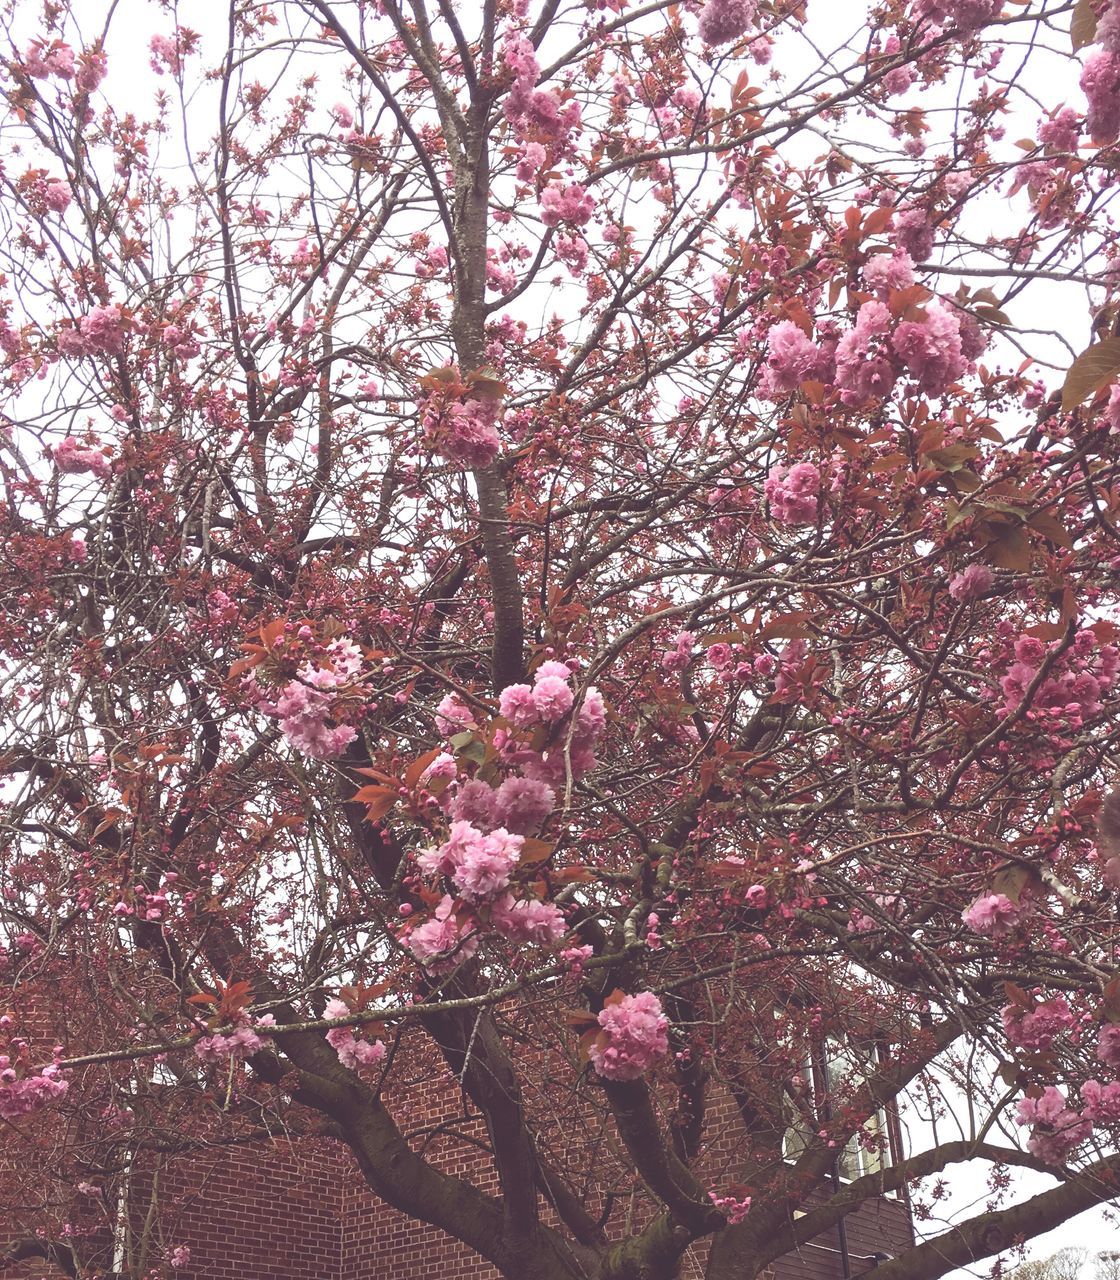 tree, growth, nature, low angle view, beauty in nature, pink color, branch, no people, freshness, flower, day, outdoors, fragility, backgrounds, close-up, sky, plum blossom